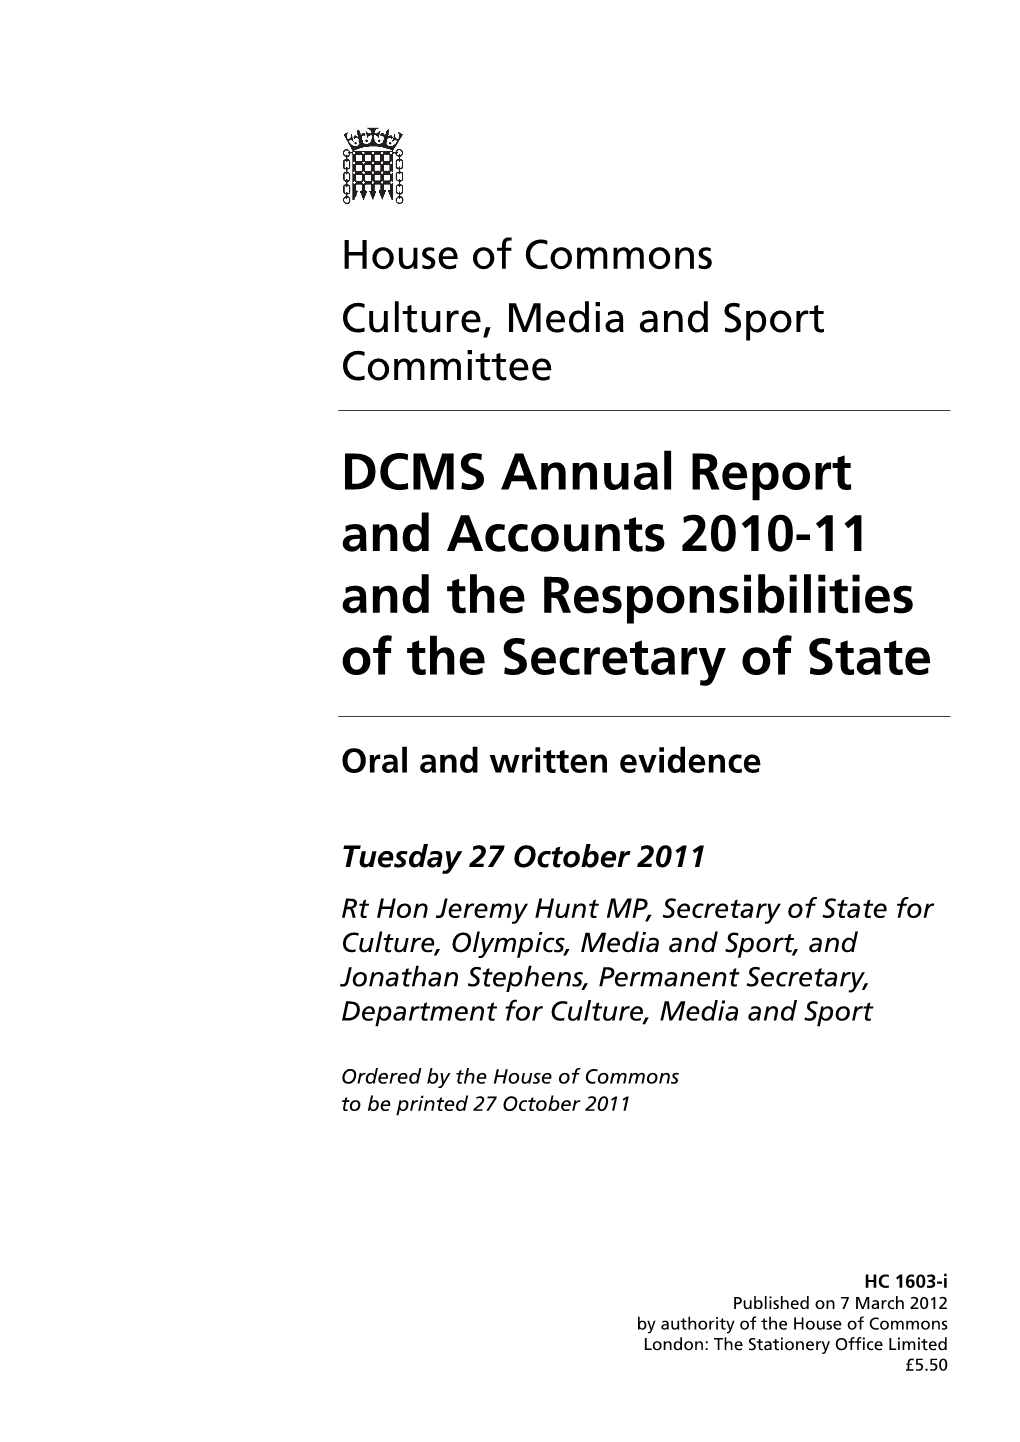 DCMS Annual Report and Accounts 2010-11 and the Responsibilities of the Secretary of State